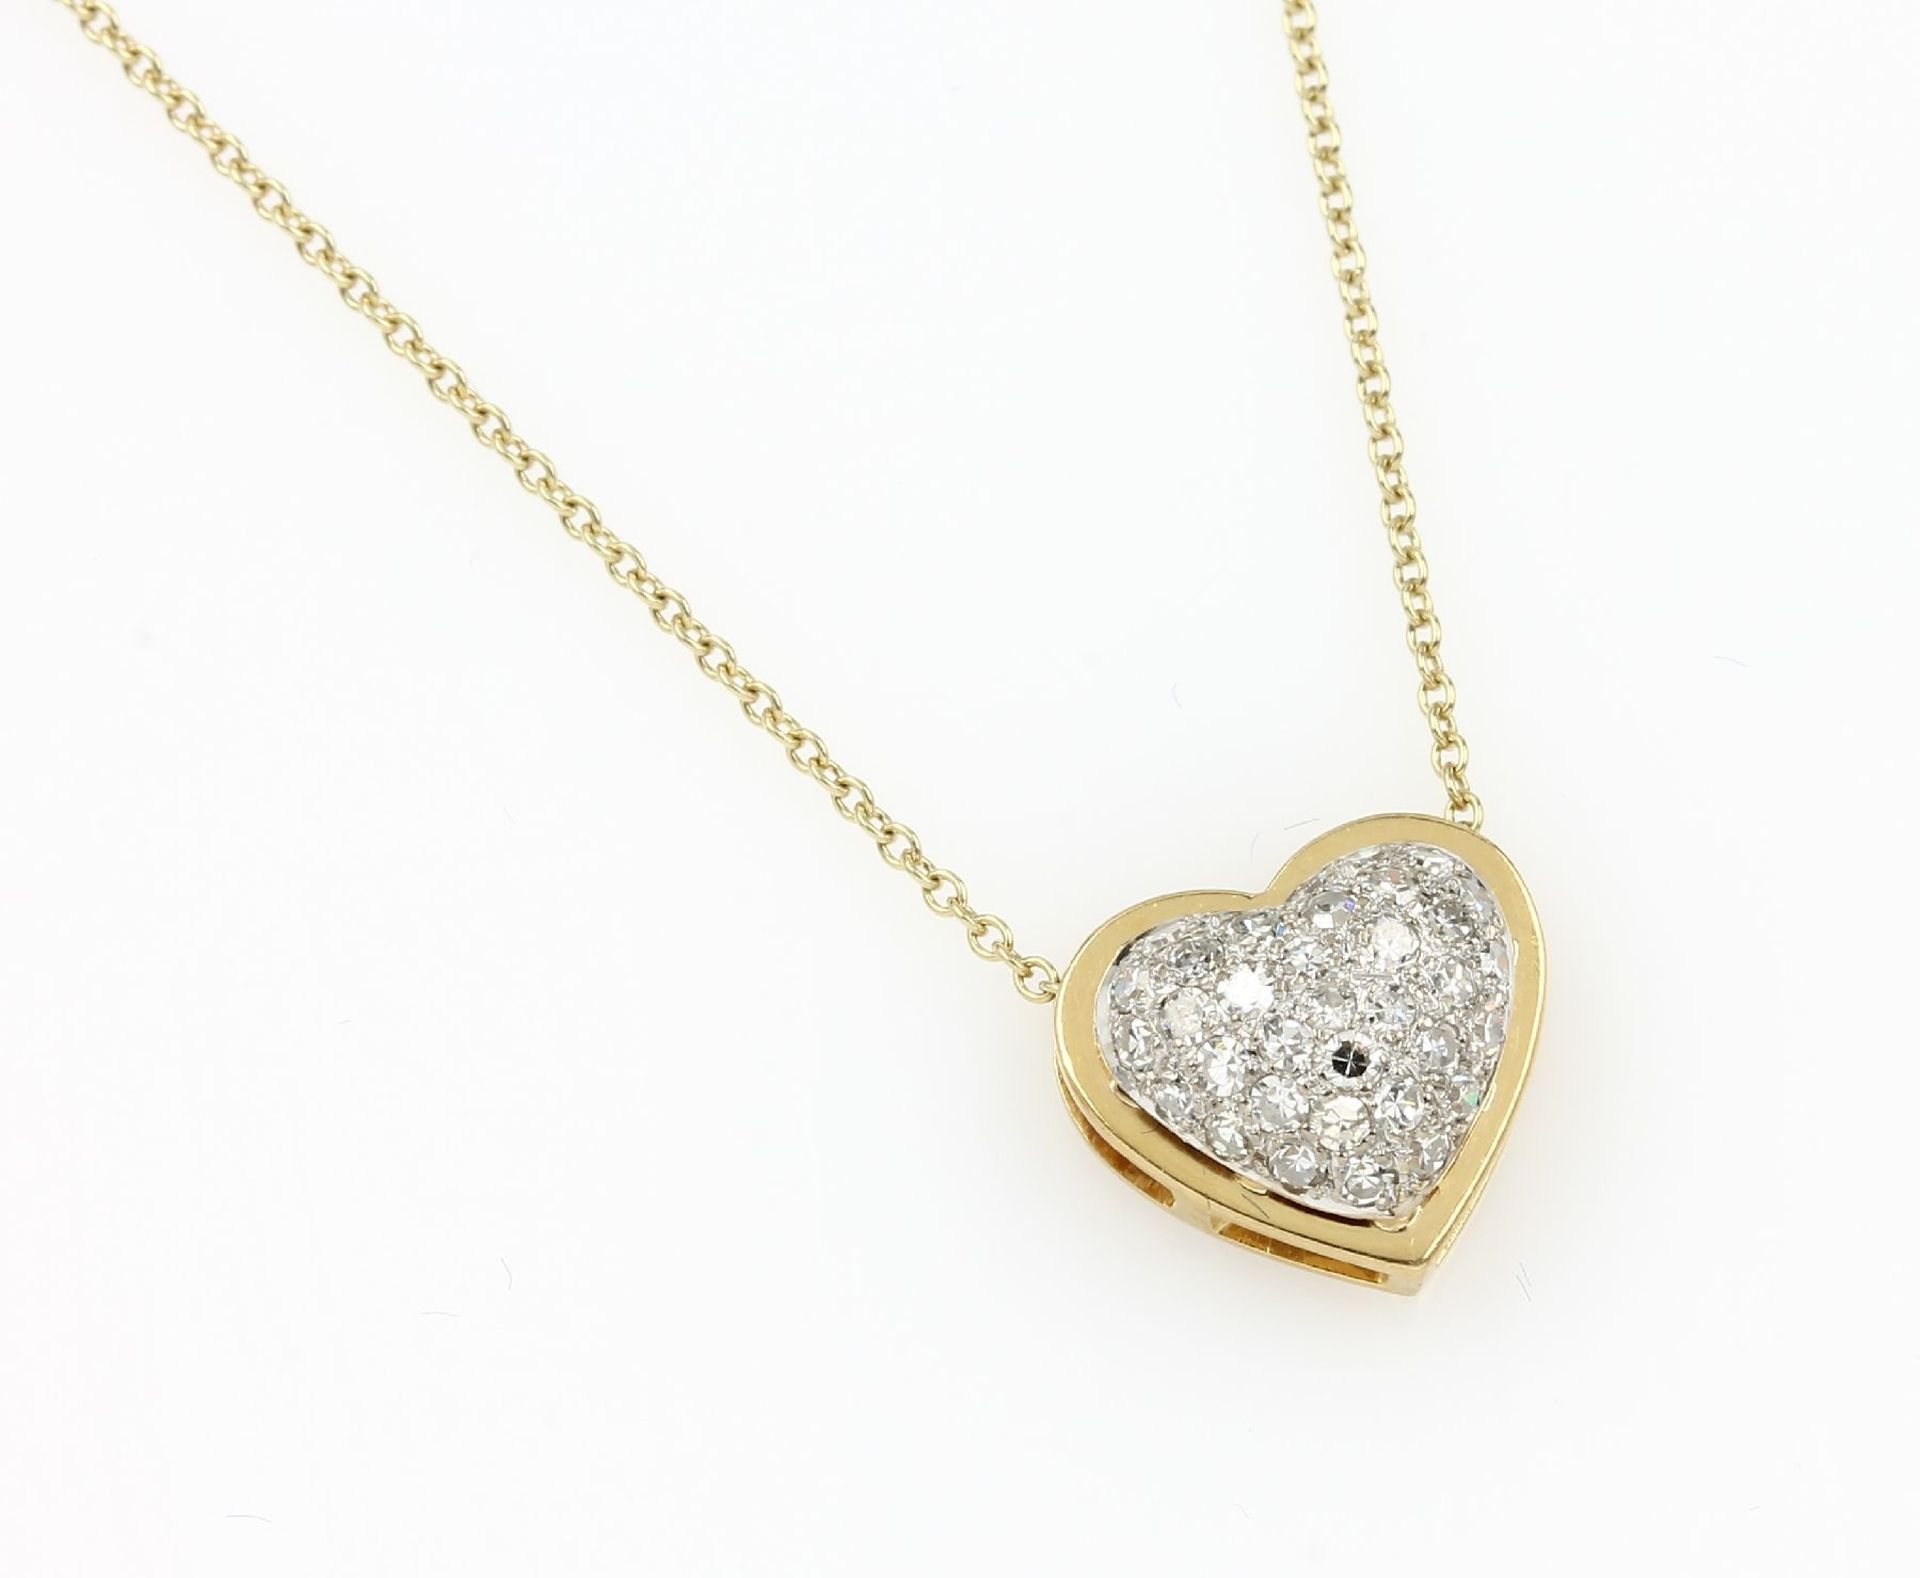 18 kt gold pendant "heart" with diamonds , YG/WG 750/000, diamonds in WG setting total approx. 0.